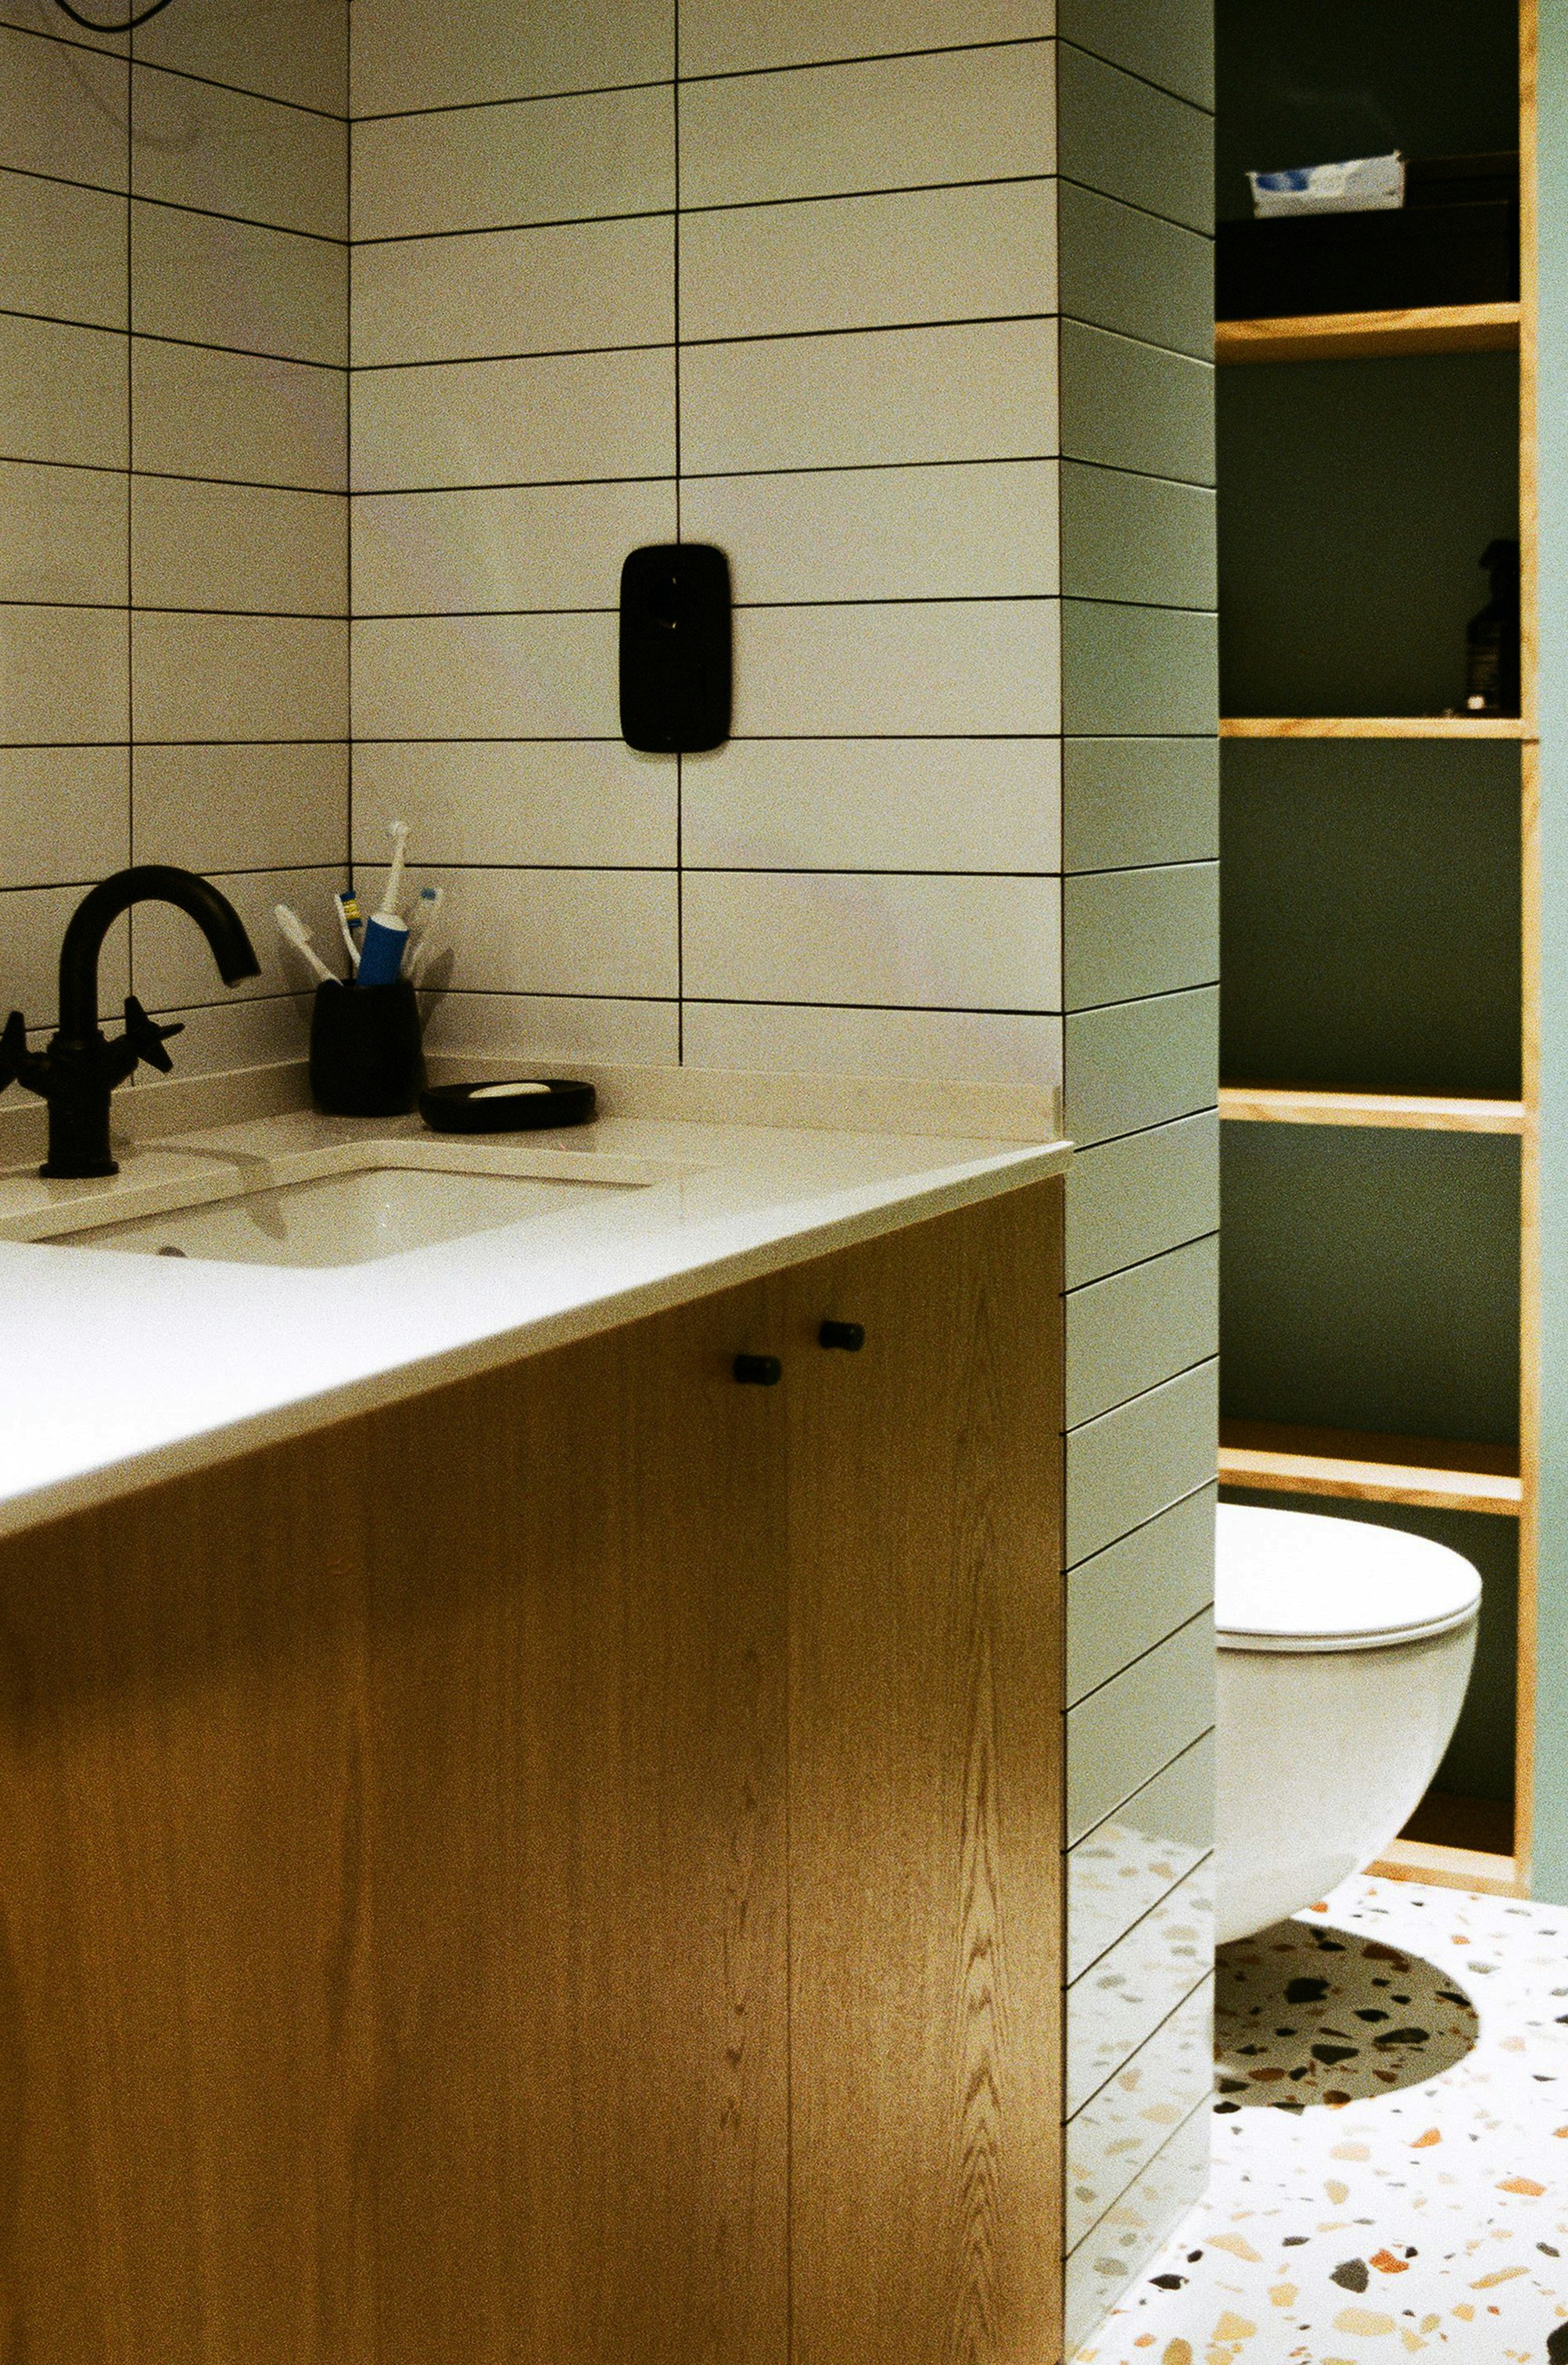 A modern wall hung toilet adds style and functionality to any bathroom